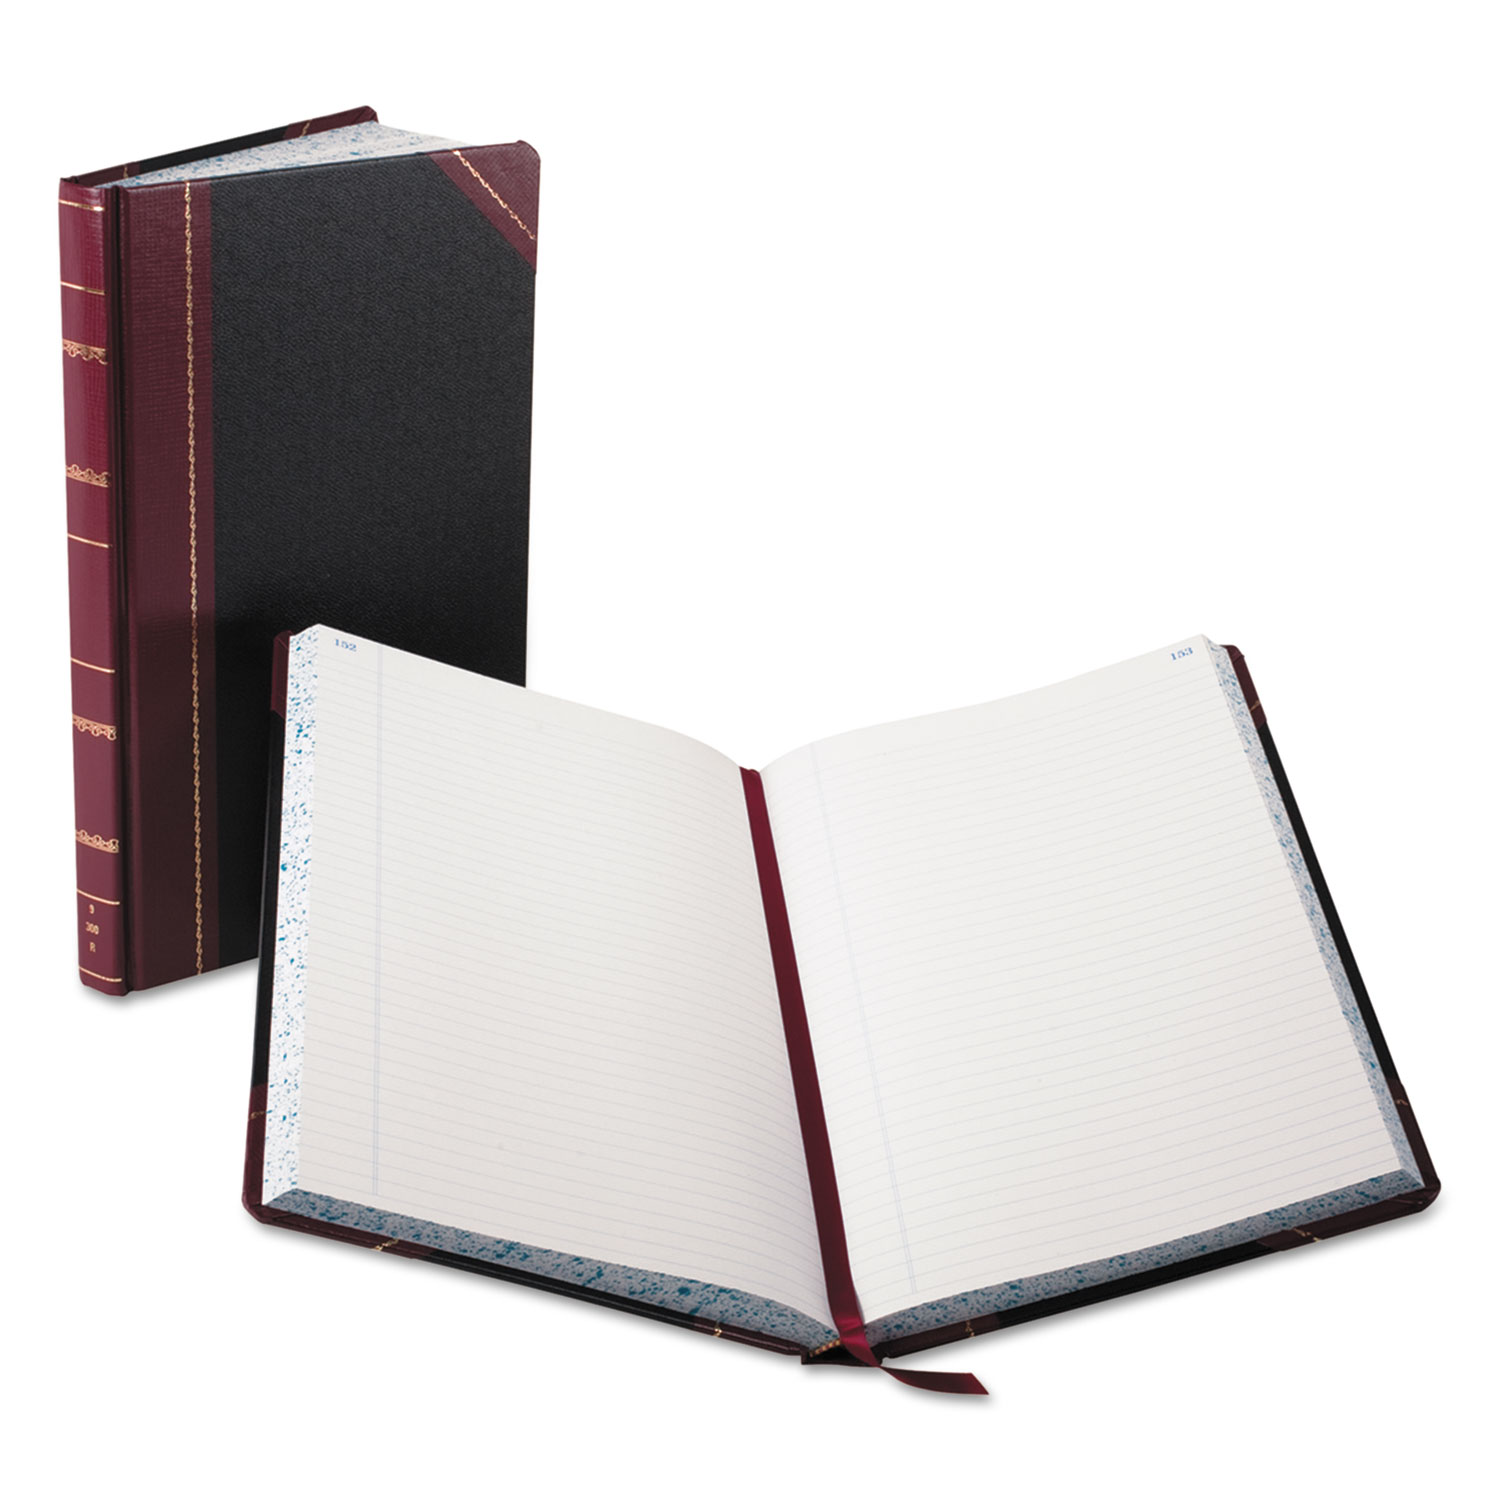  Boorum & Pease 9-300-R Record/Account Book, Black/Red Cover, 300 Pages, 14 1/8 x 8 5/8 (BOR9300R) 